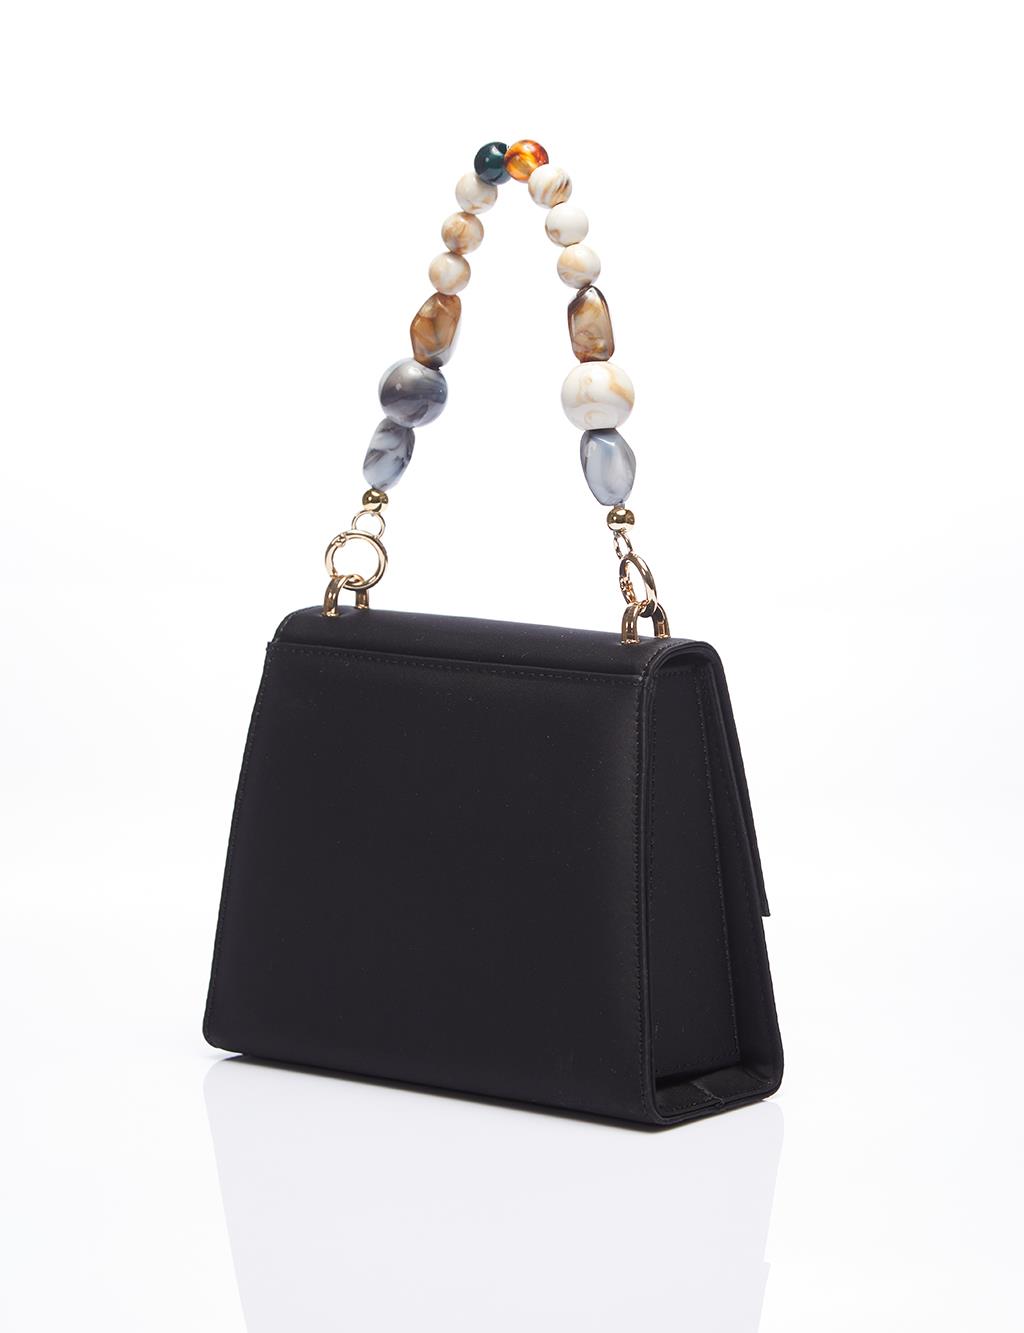 Beaded Cover Satin Bag with Metal Accessories Black